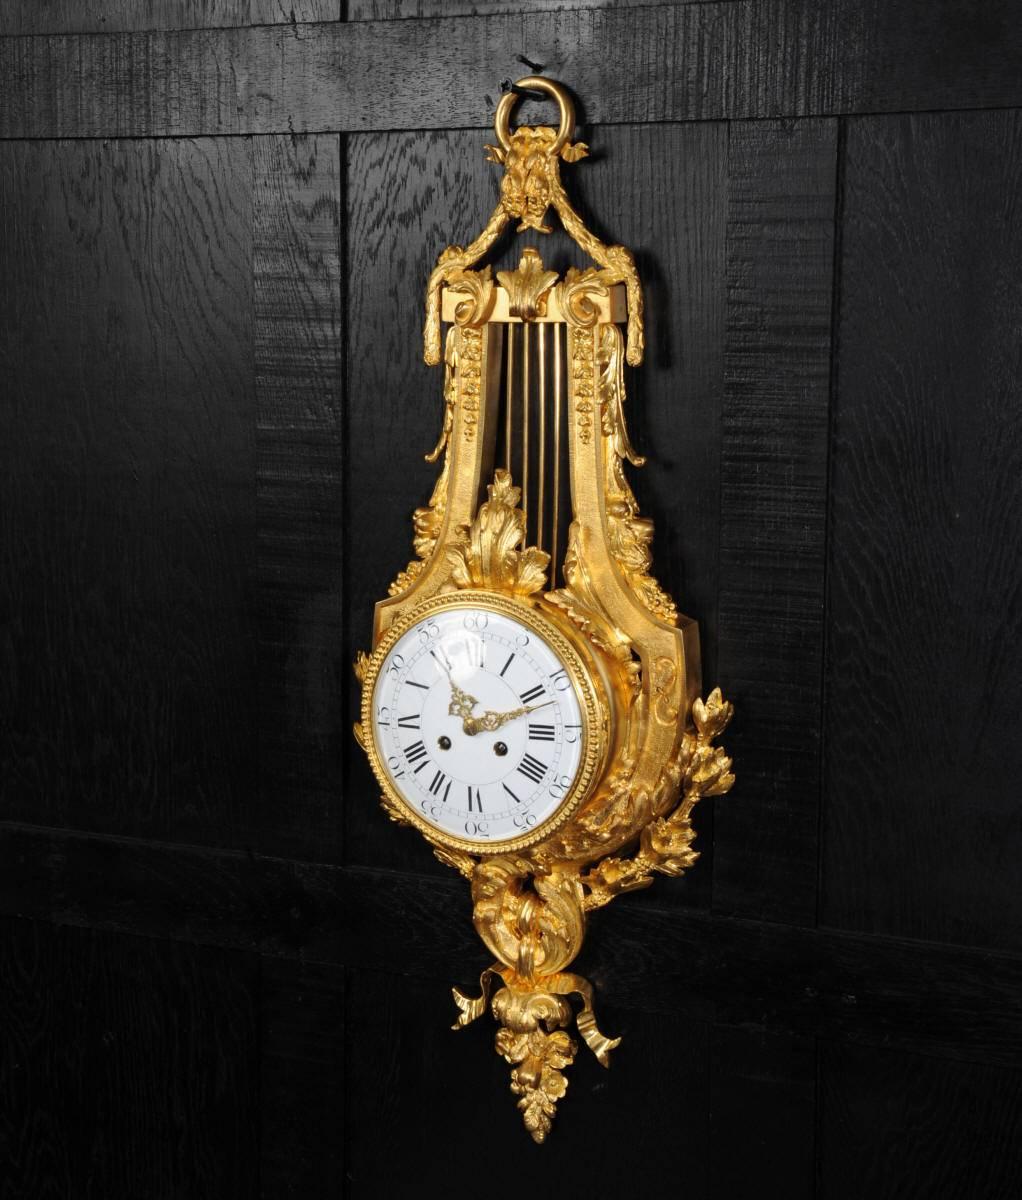 A magnificent large antique French lyre wall clock, exquisitely made in ormolu (finely gilded bronze or Doré Bronze). It is modelled in the Classic style of Louis XVI in the shape or a large (30" high) lyre with acanthus decoration. The quality